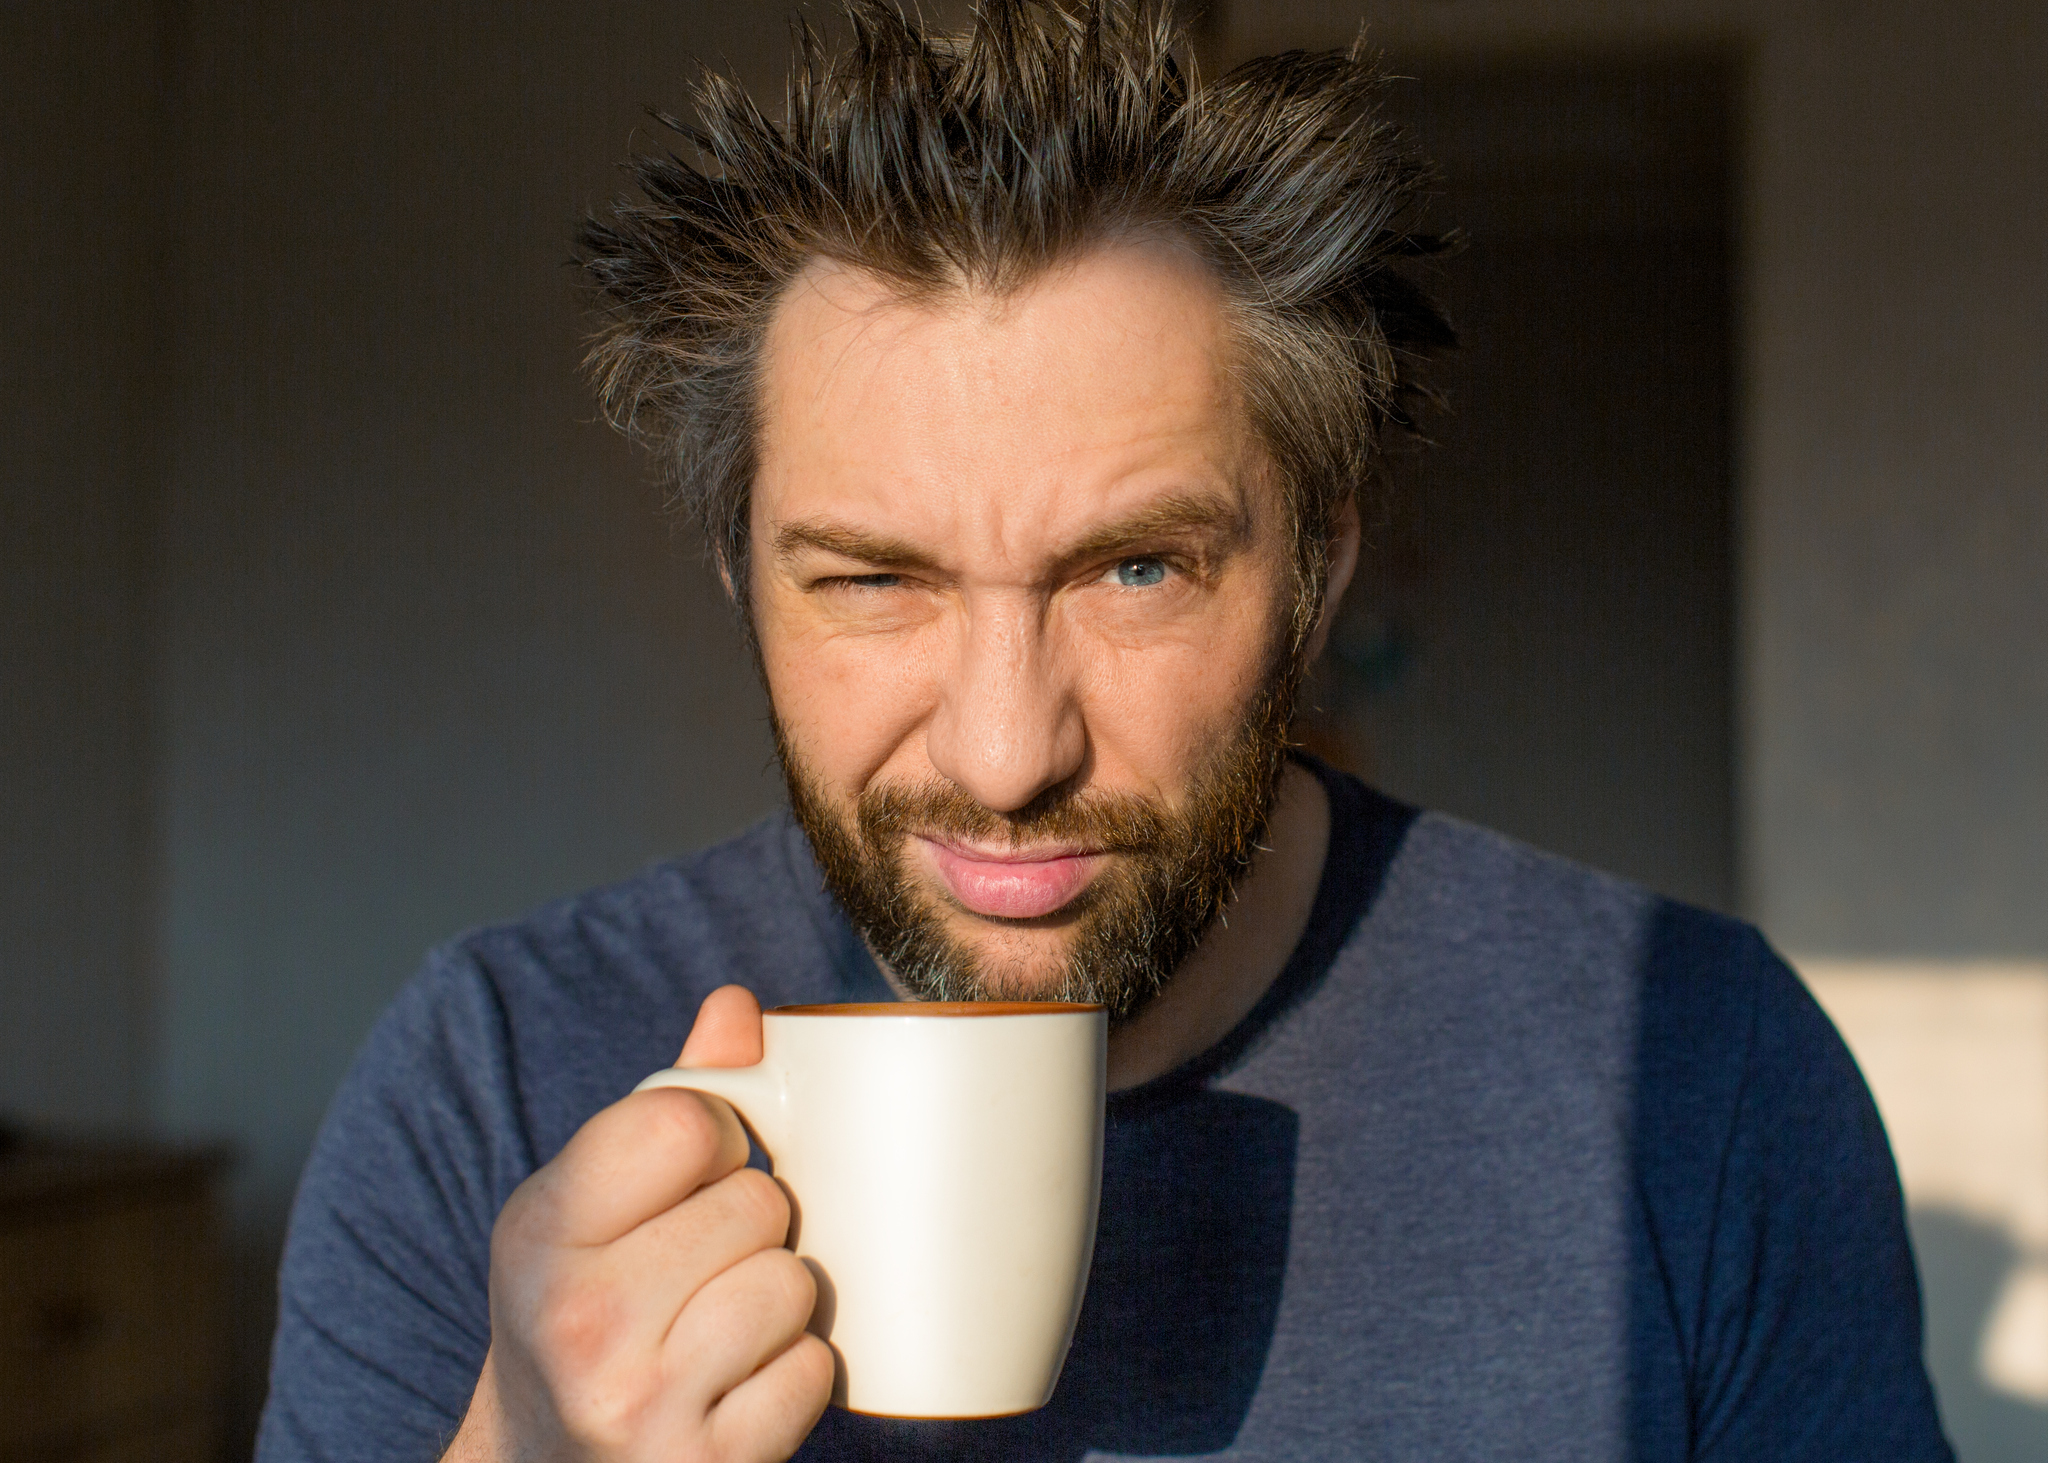 The coffee brew method that raises cholesterol most for men